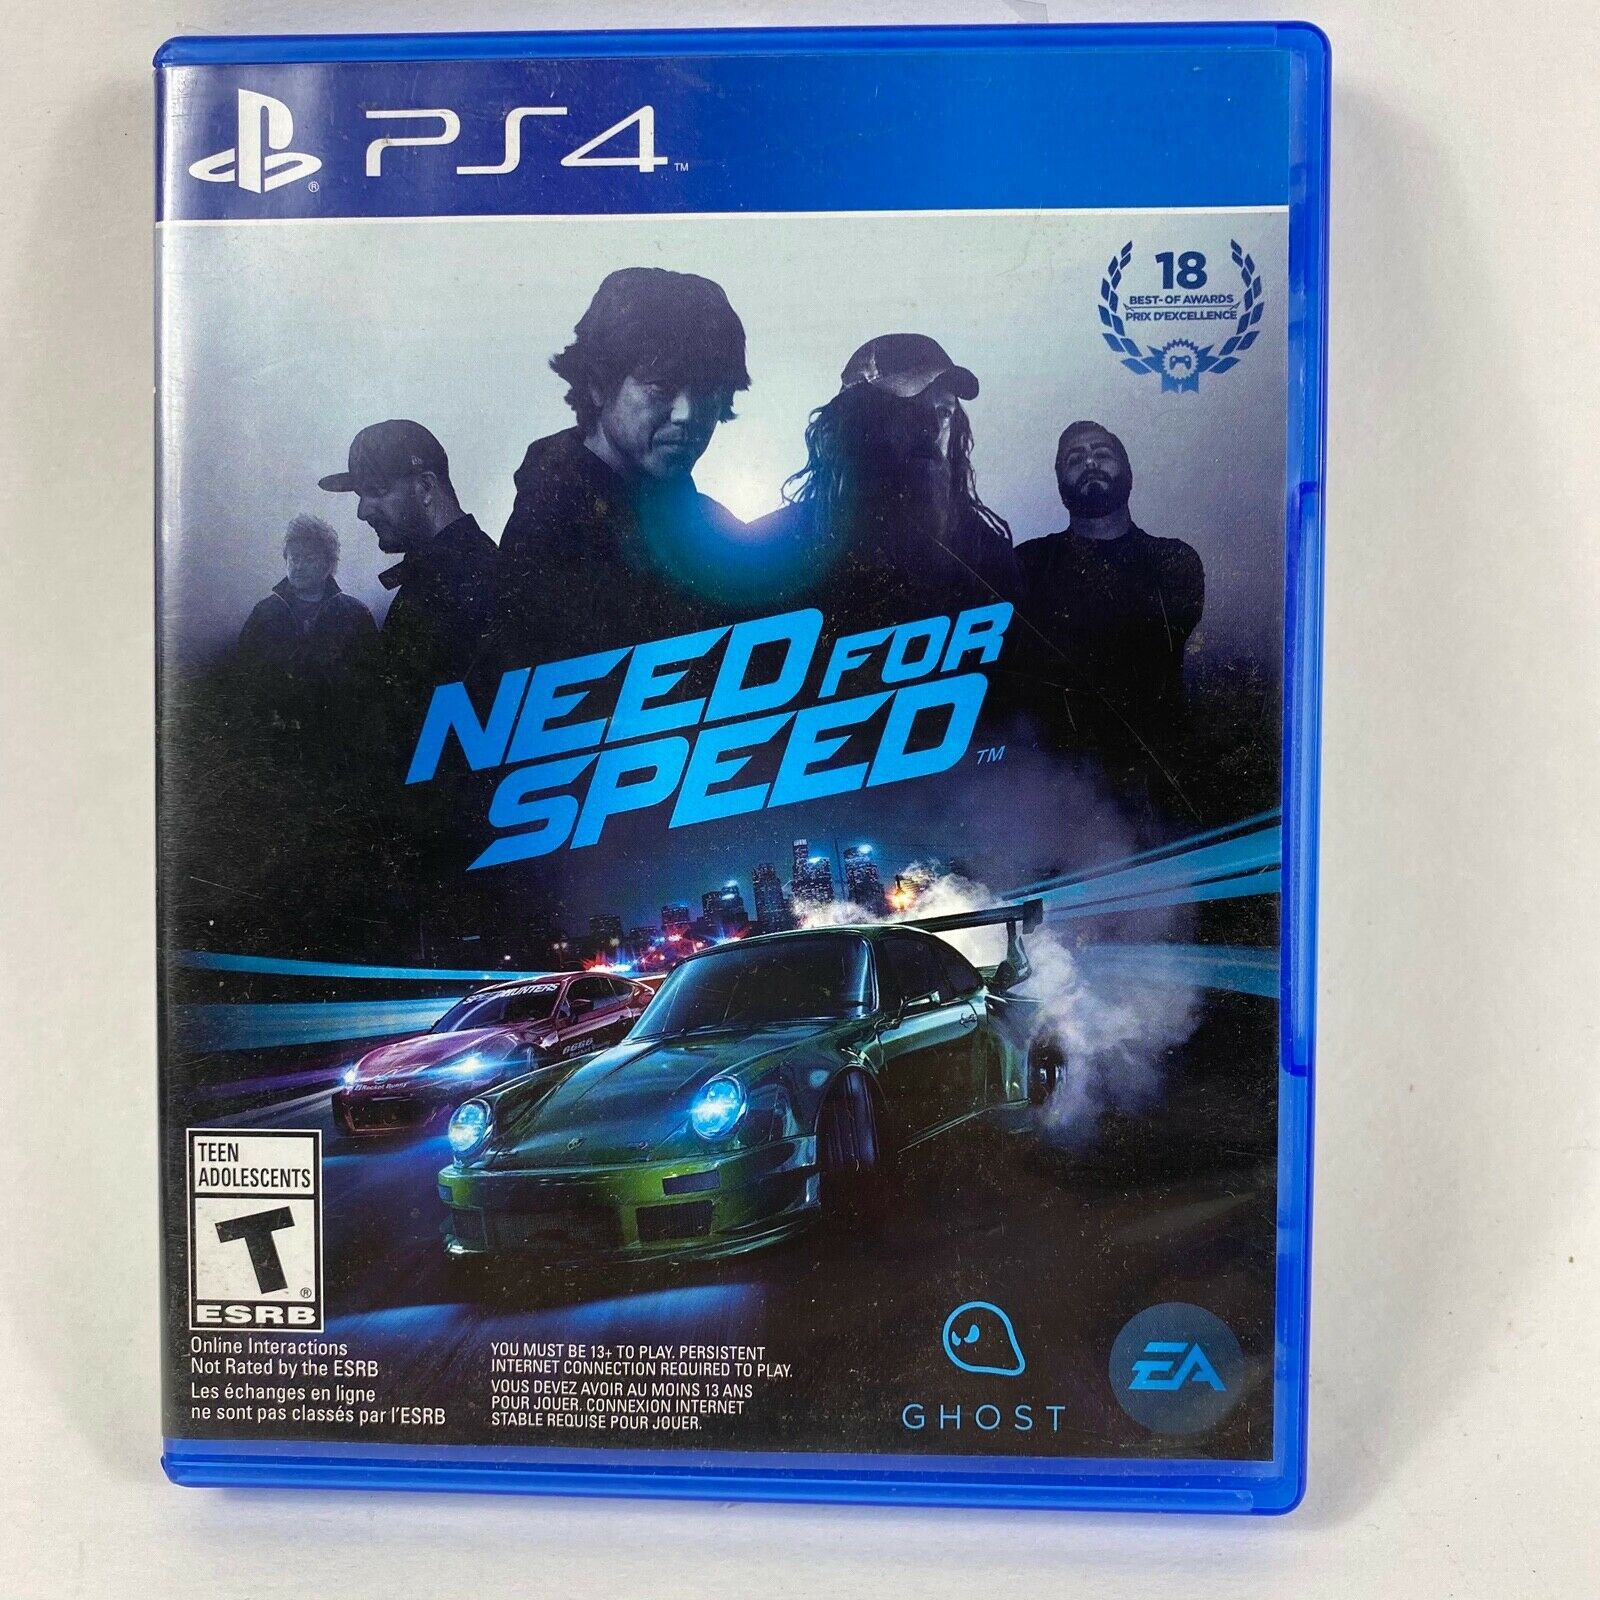 Primary image for PS4 Need for Speed - Sony PlayStation 4 Game Disc in Very Good Cond. NO MANUAL